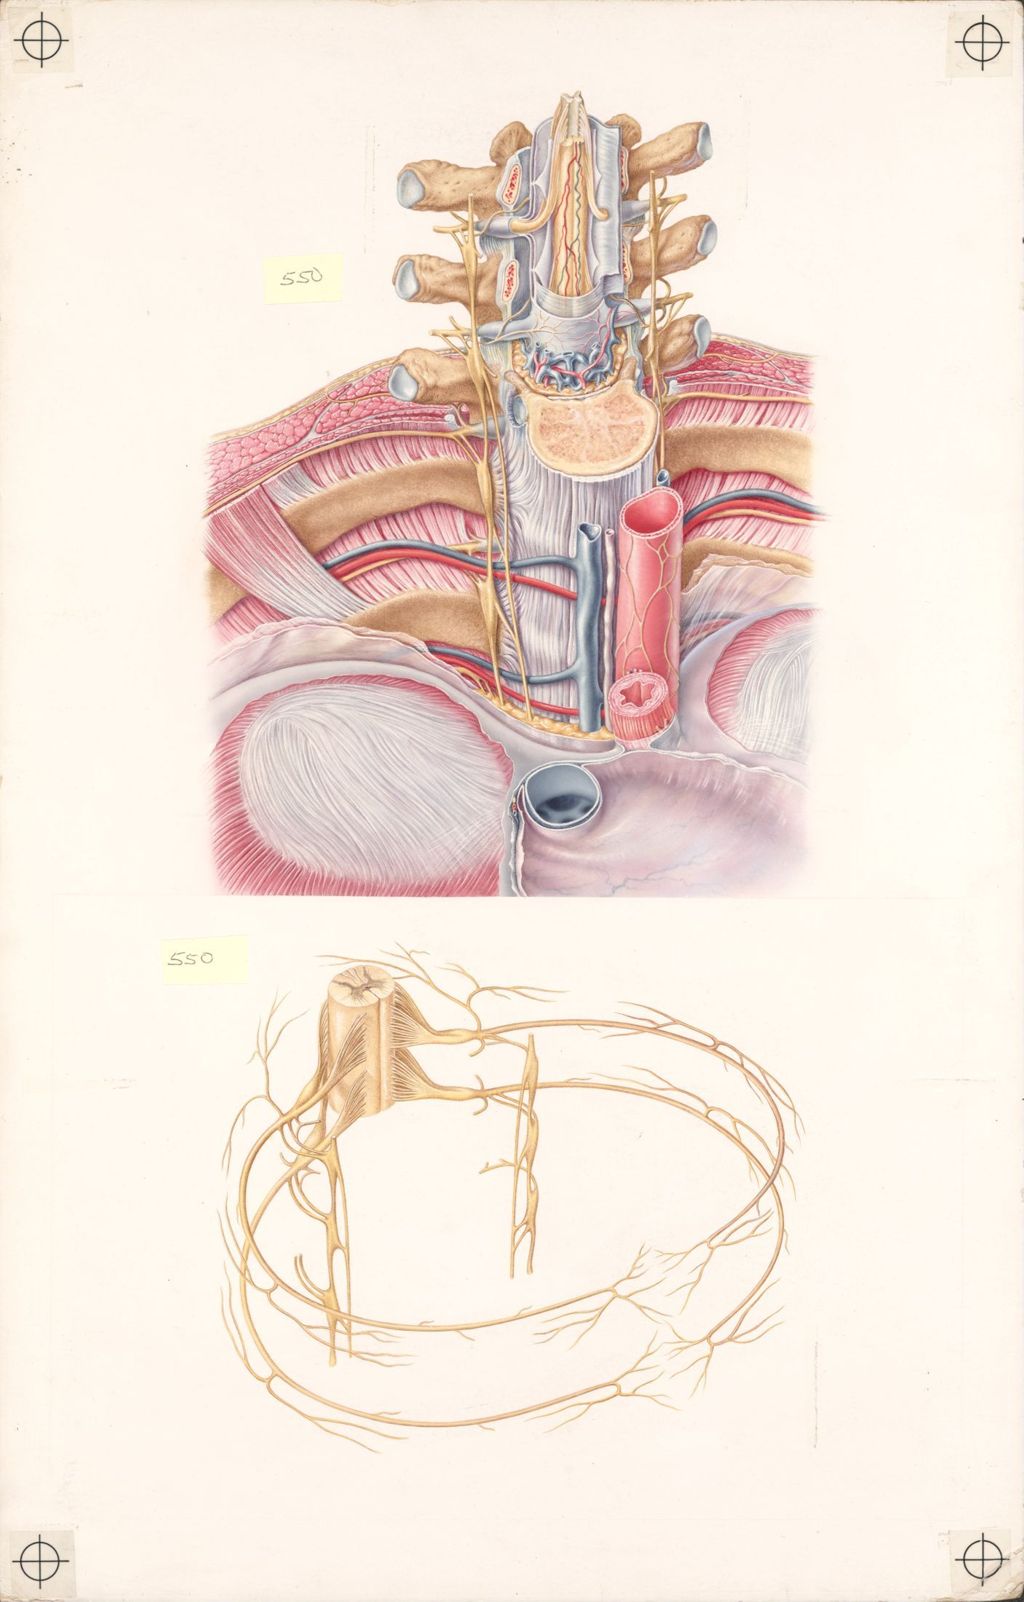 Doctor-Patient Explanatory Atlas of Anatomy, Plate I, Relationships of Spinal Nerves and Vertebrae